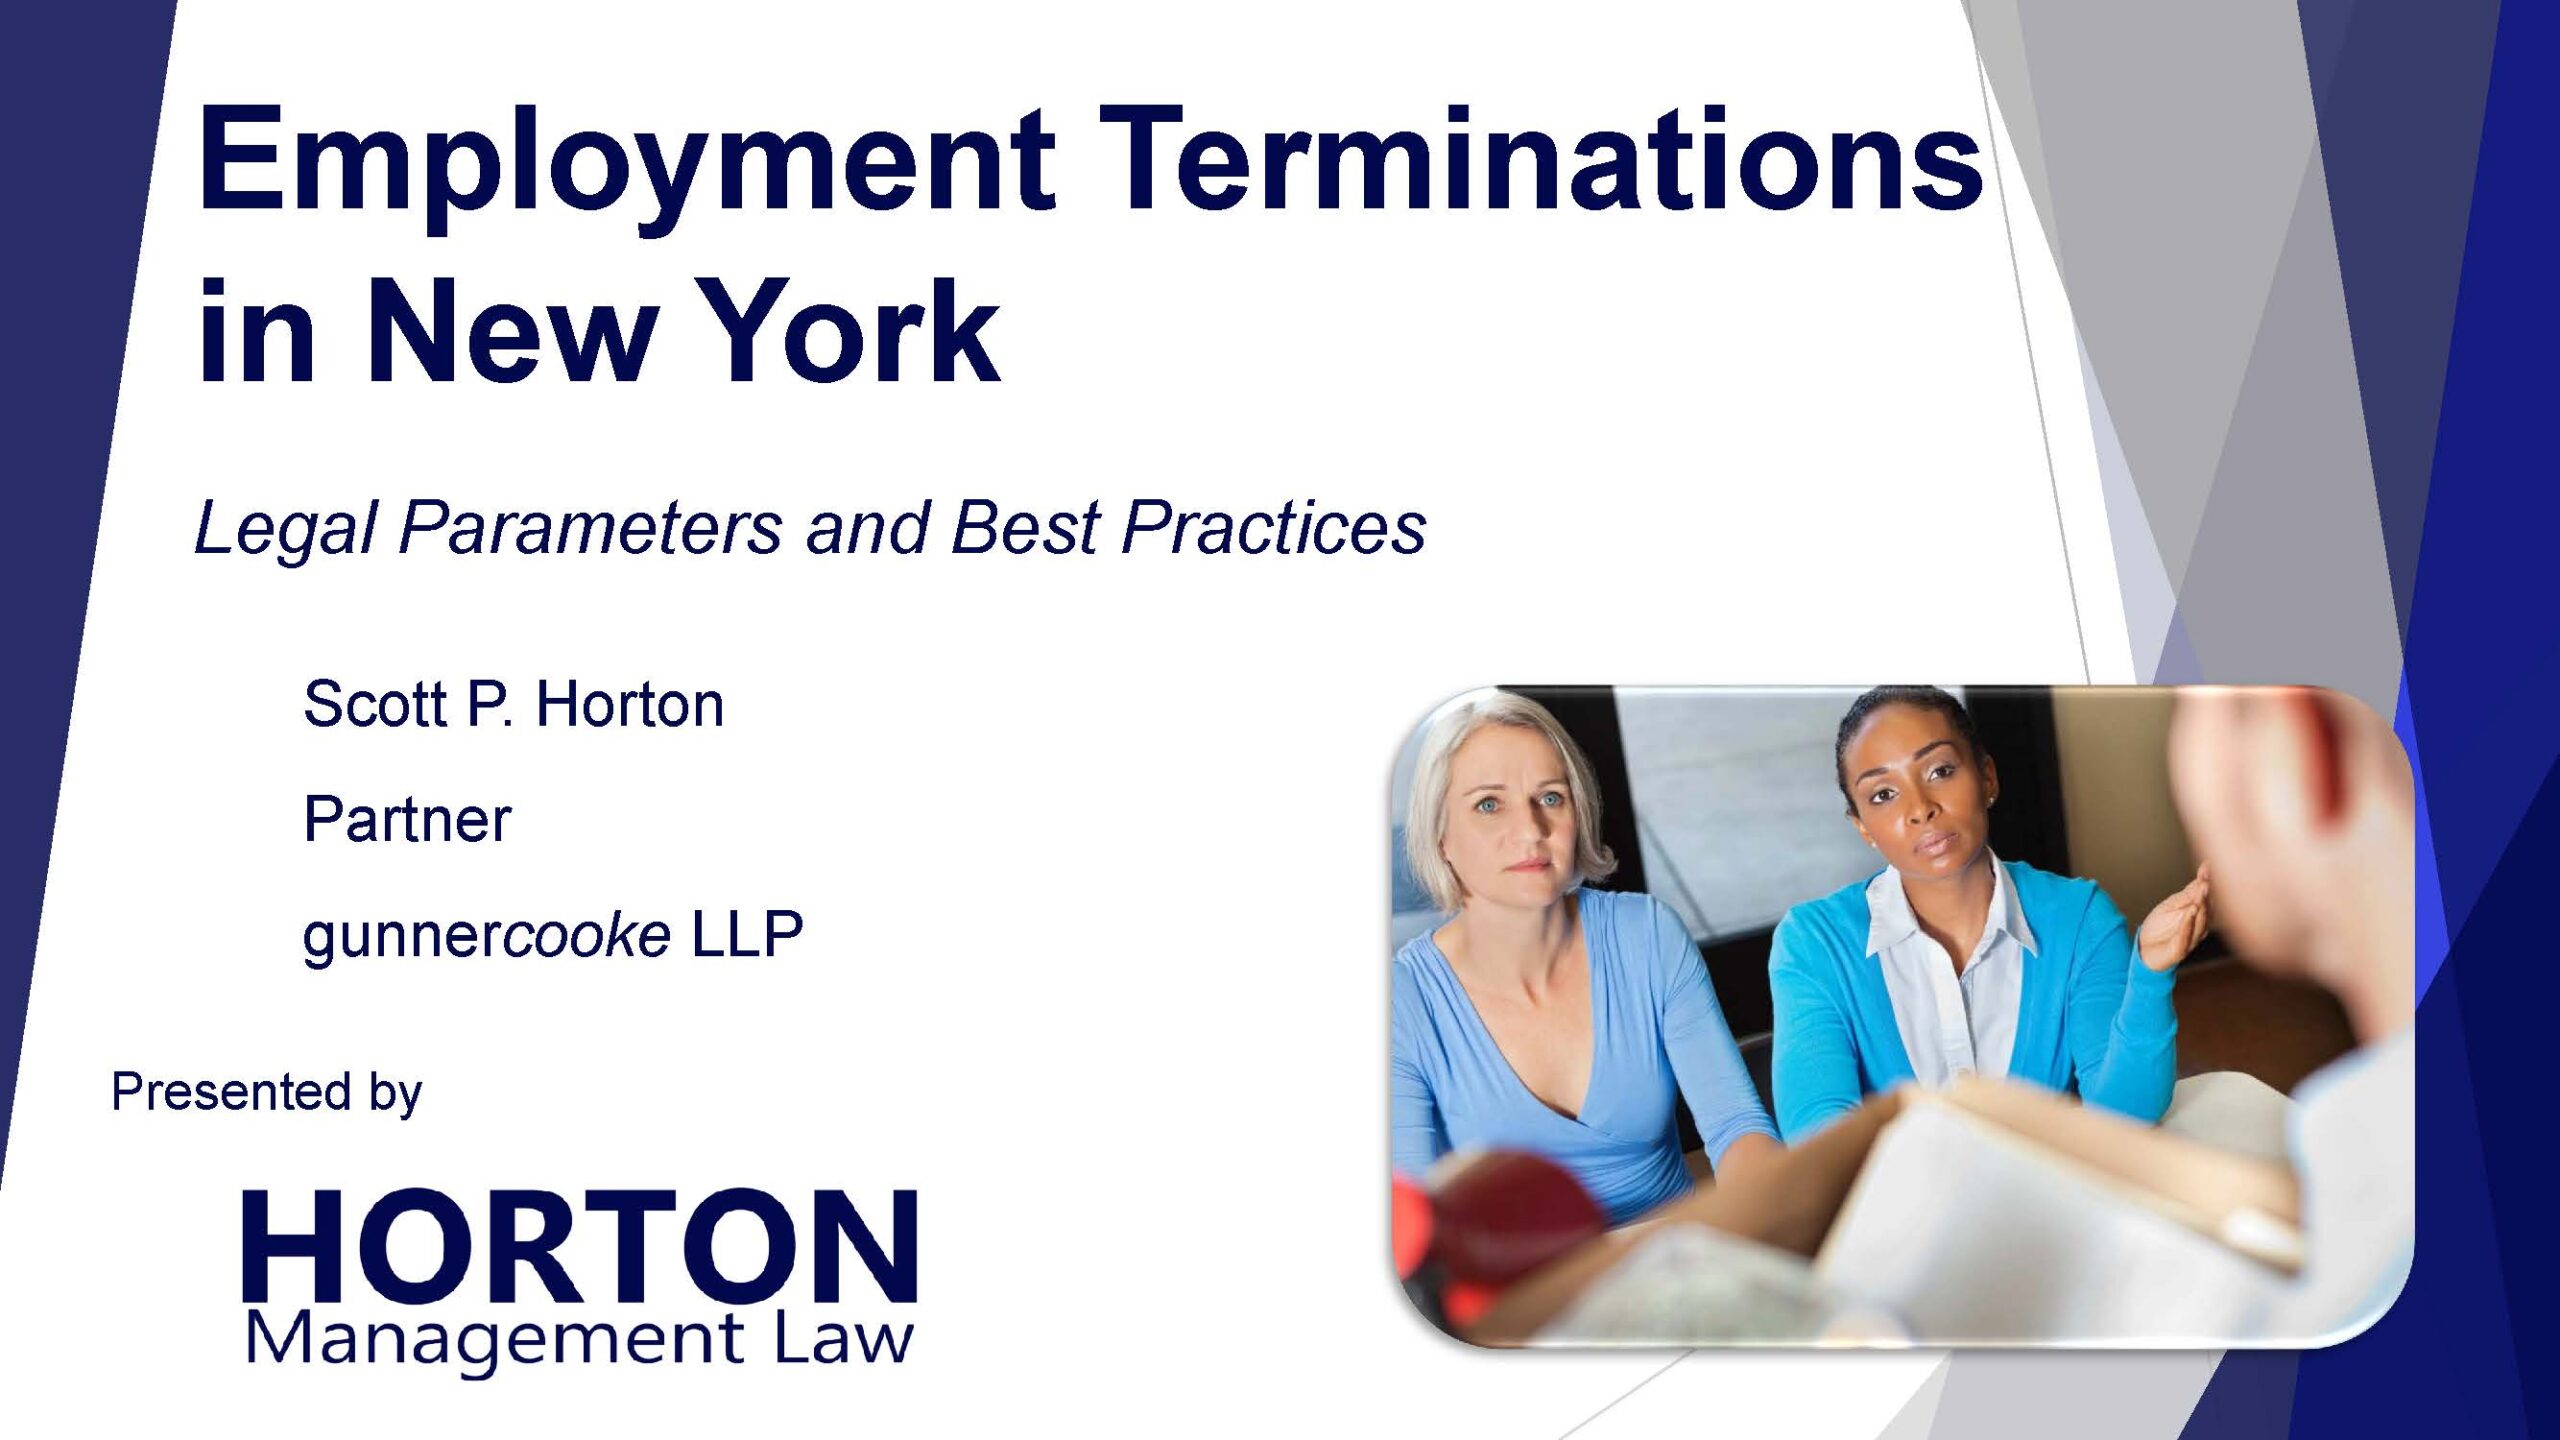 Employment Terminations in New York Cover Slide